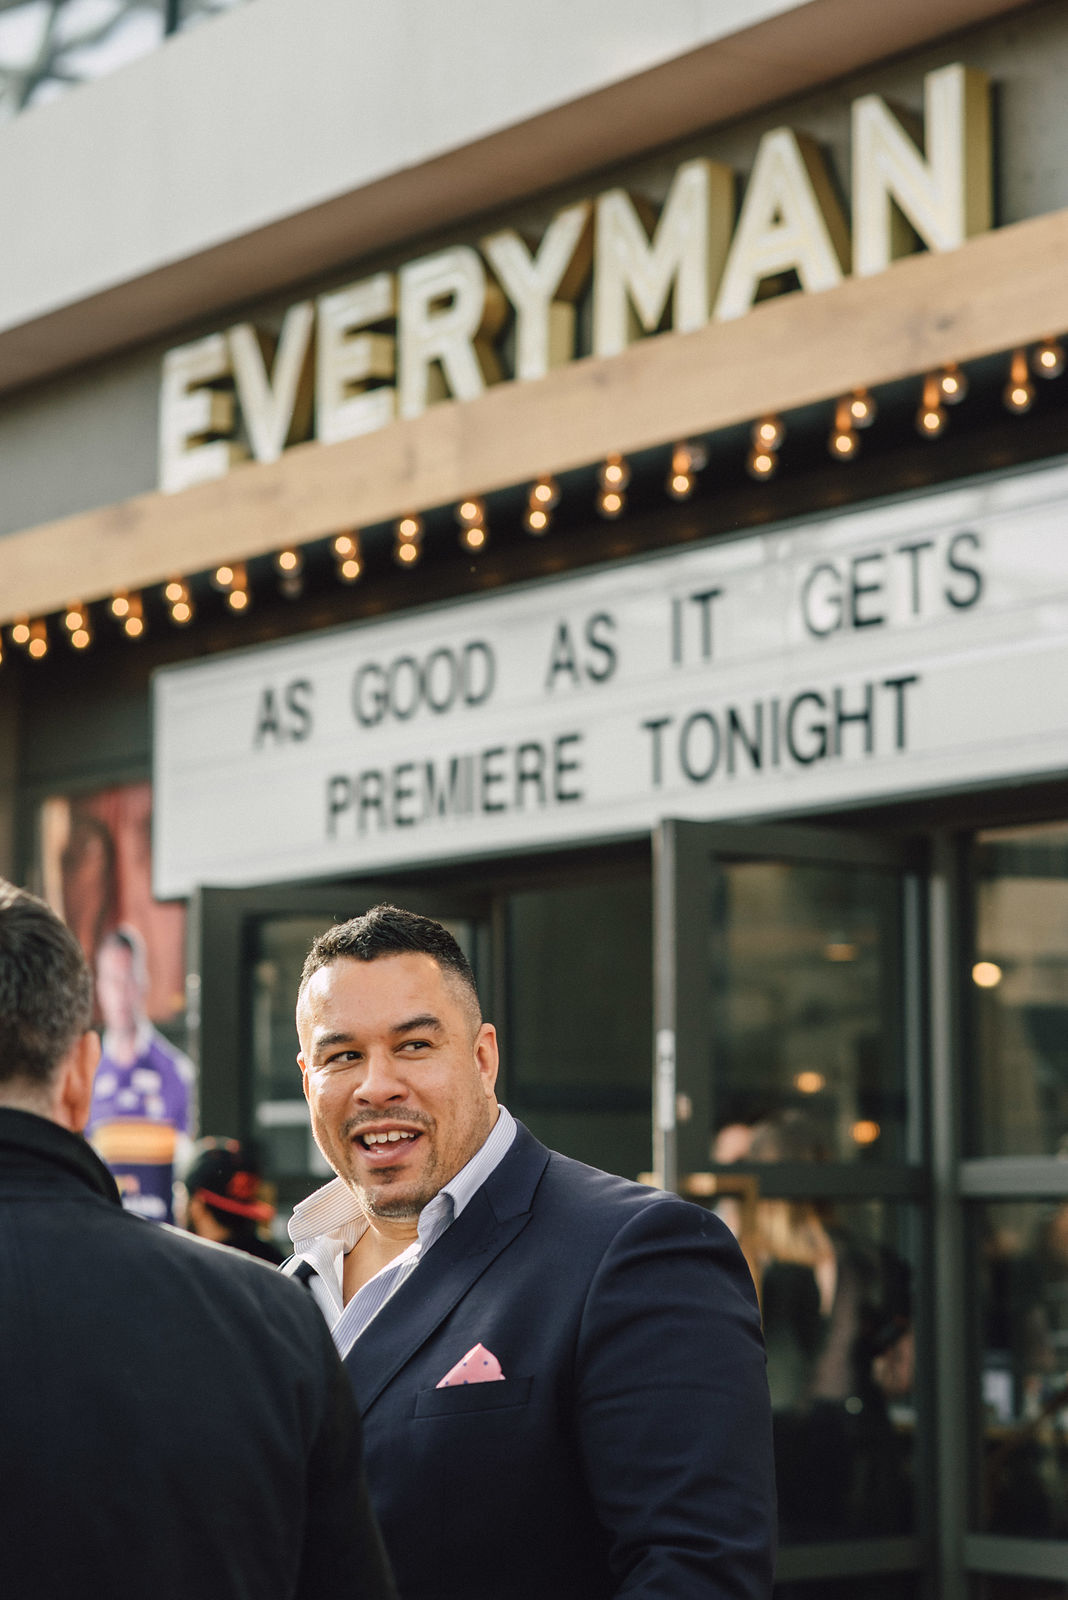 As Good As It Gets? Premiere 